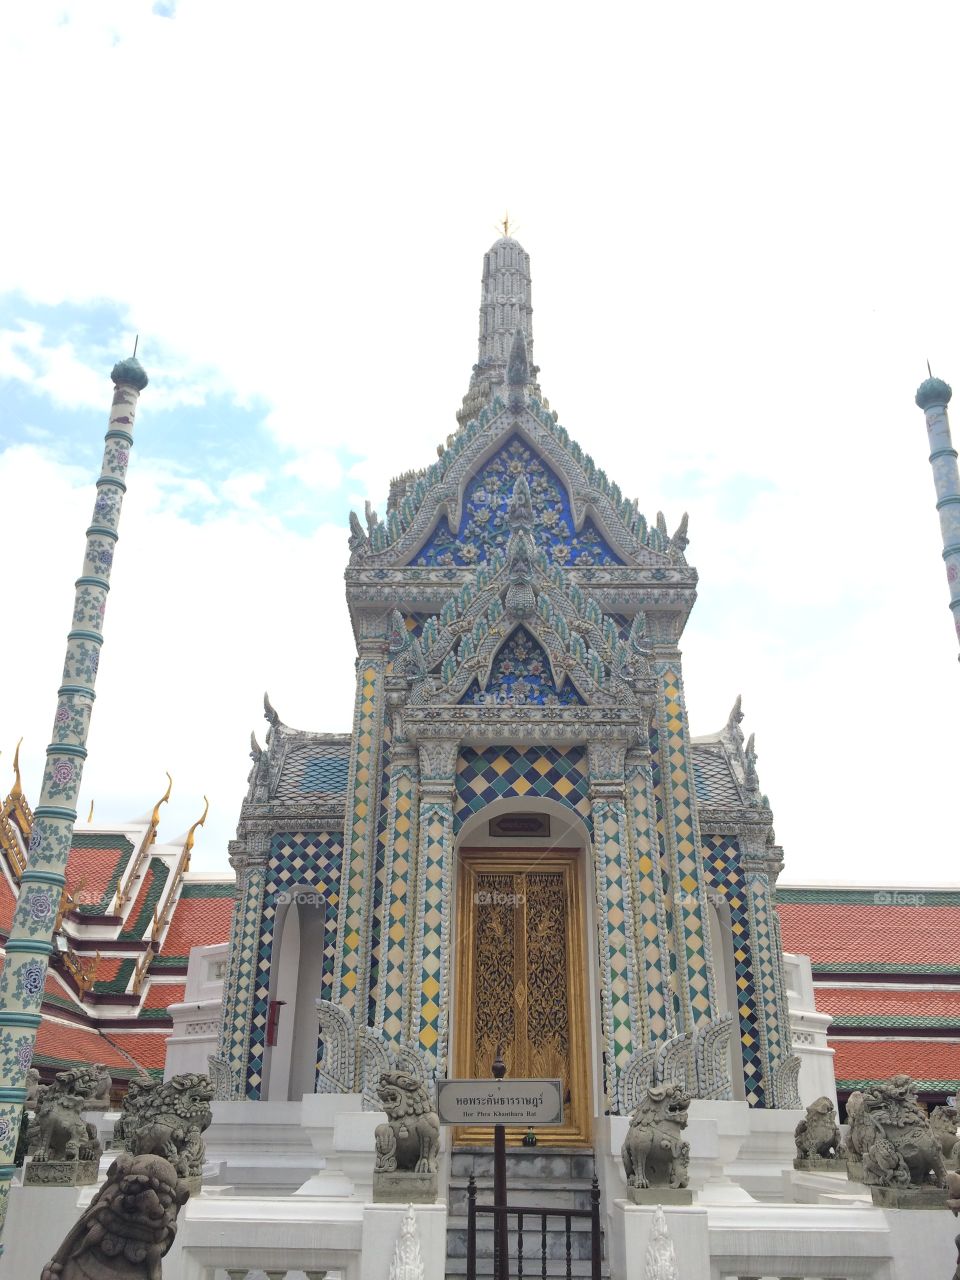 Bangkok, Thailand: Grand Palace temple with mosaic tiles, yellow and blue tiles, wooden doors, and gold Buddha